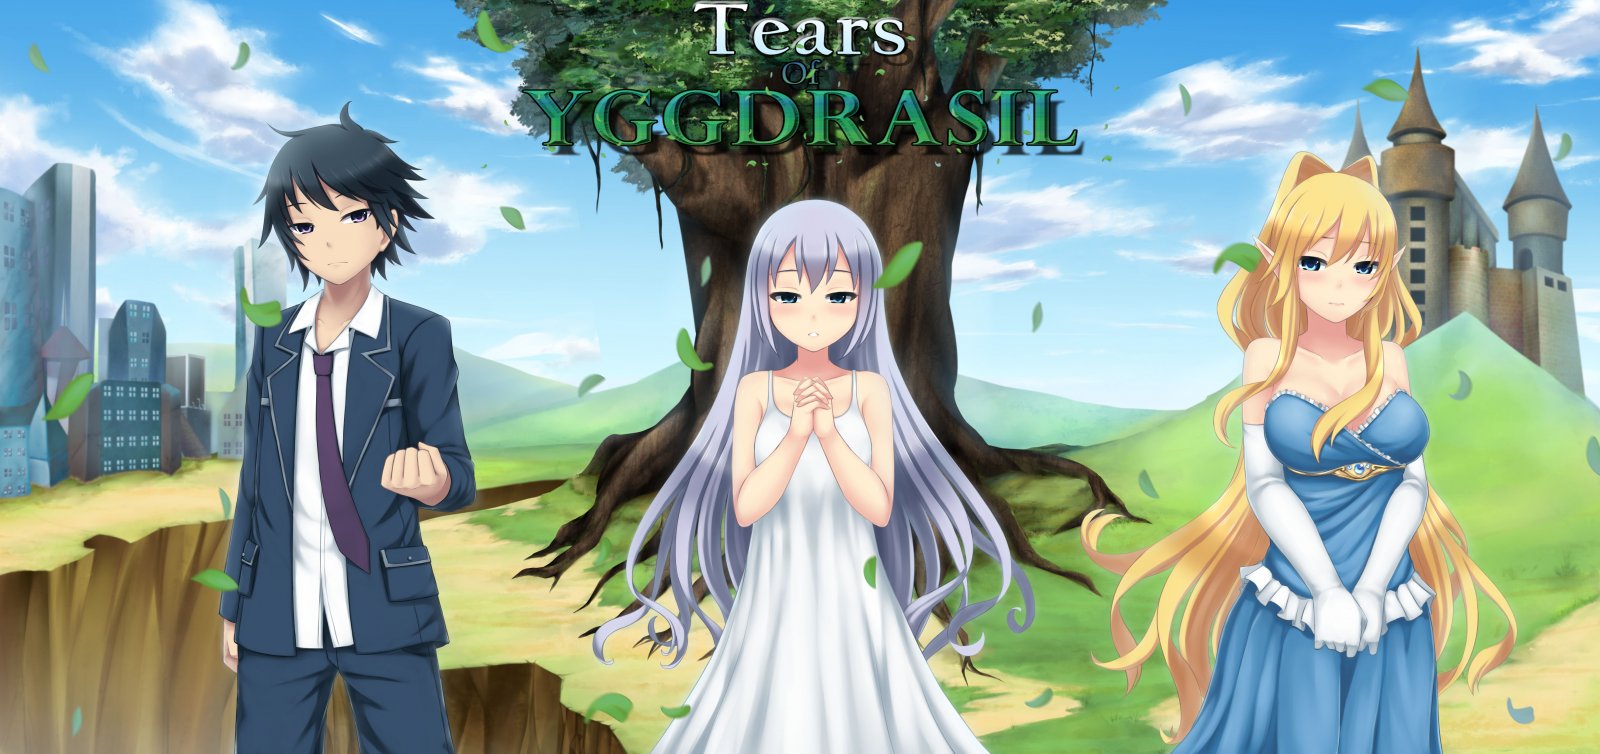 Tears Of Yggdrasi Completed by Moonstar English Porn Game